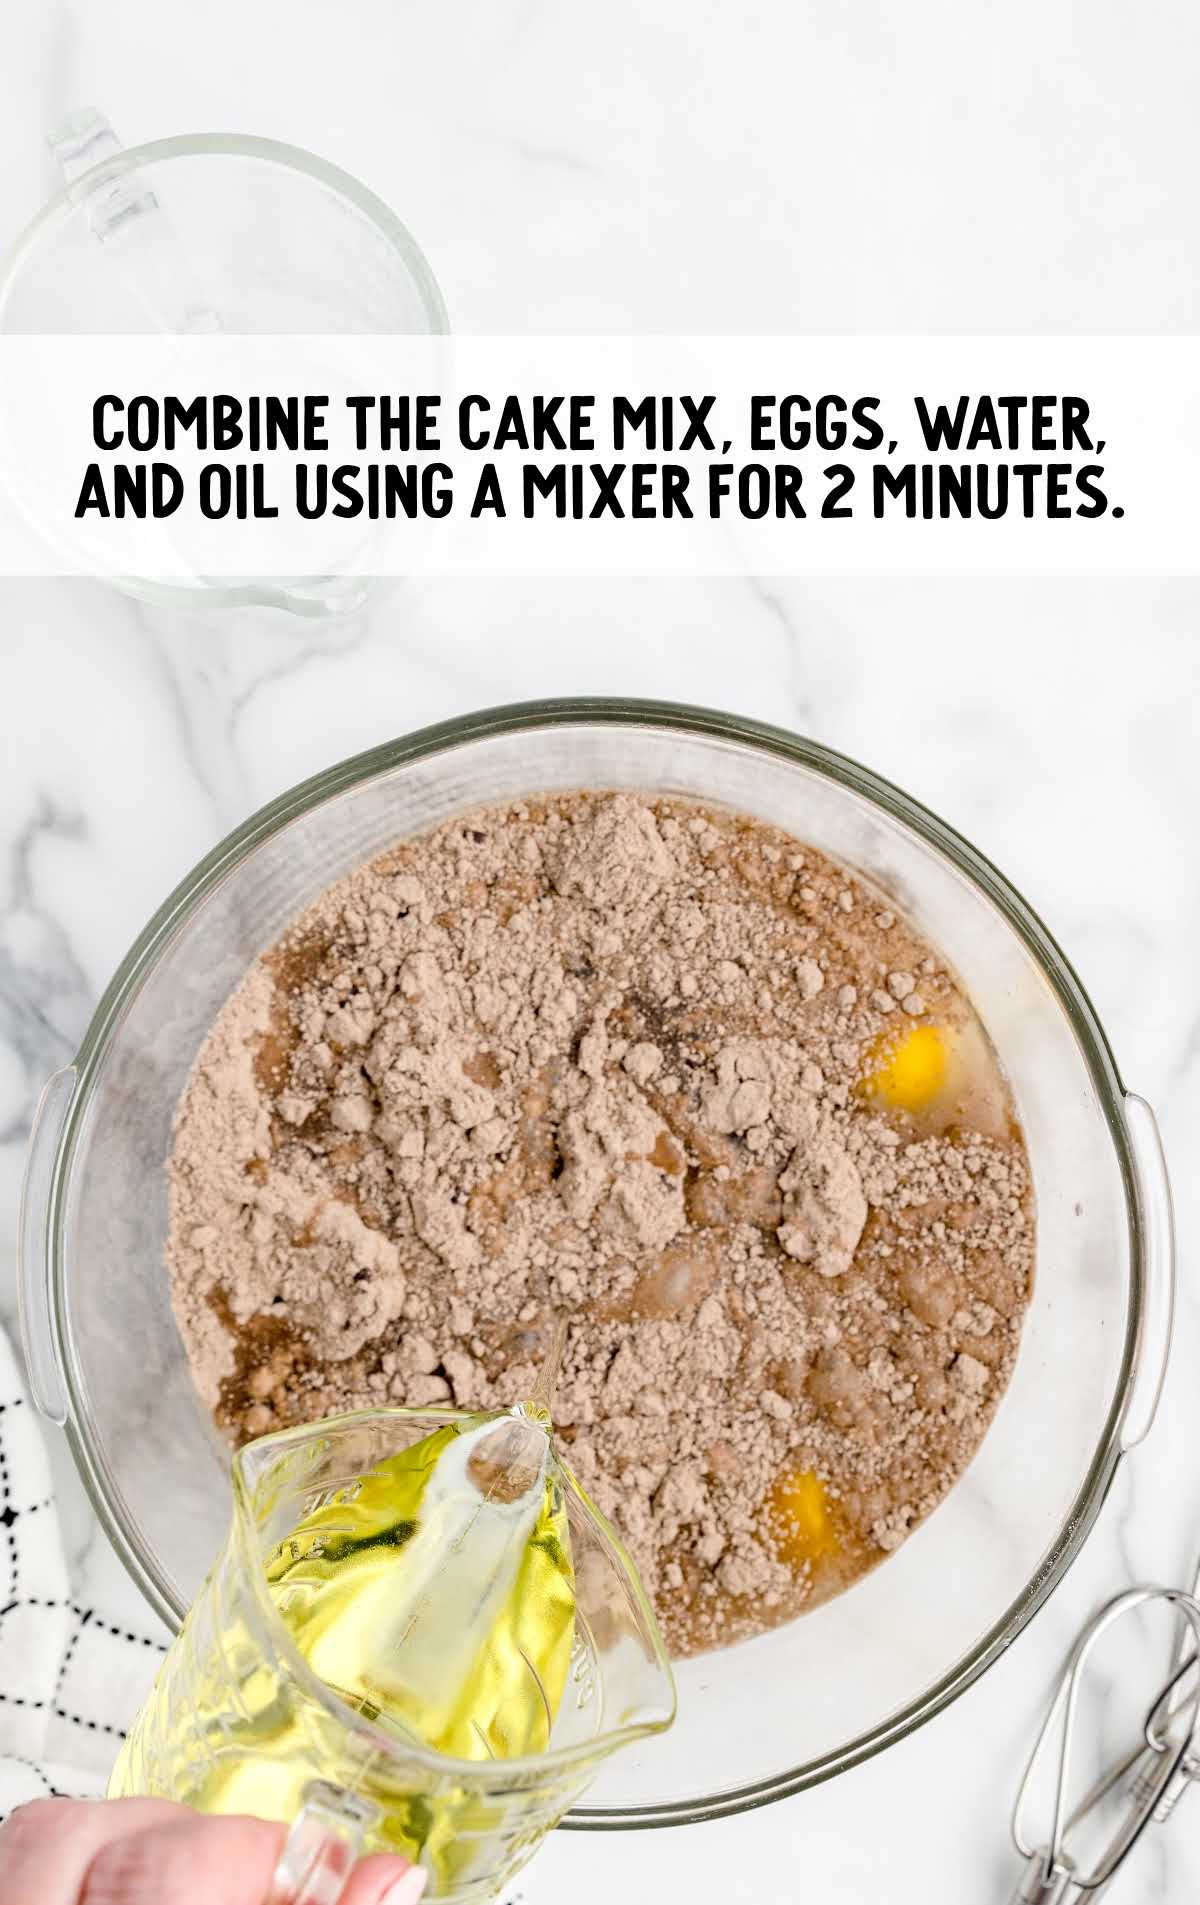 cake mix, eggs, water, and oil combined together